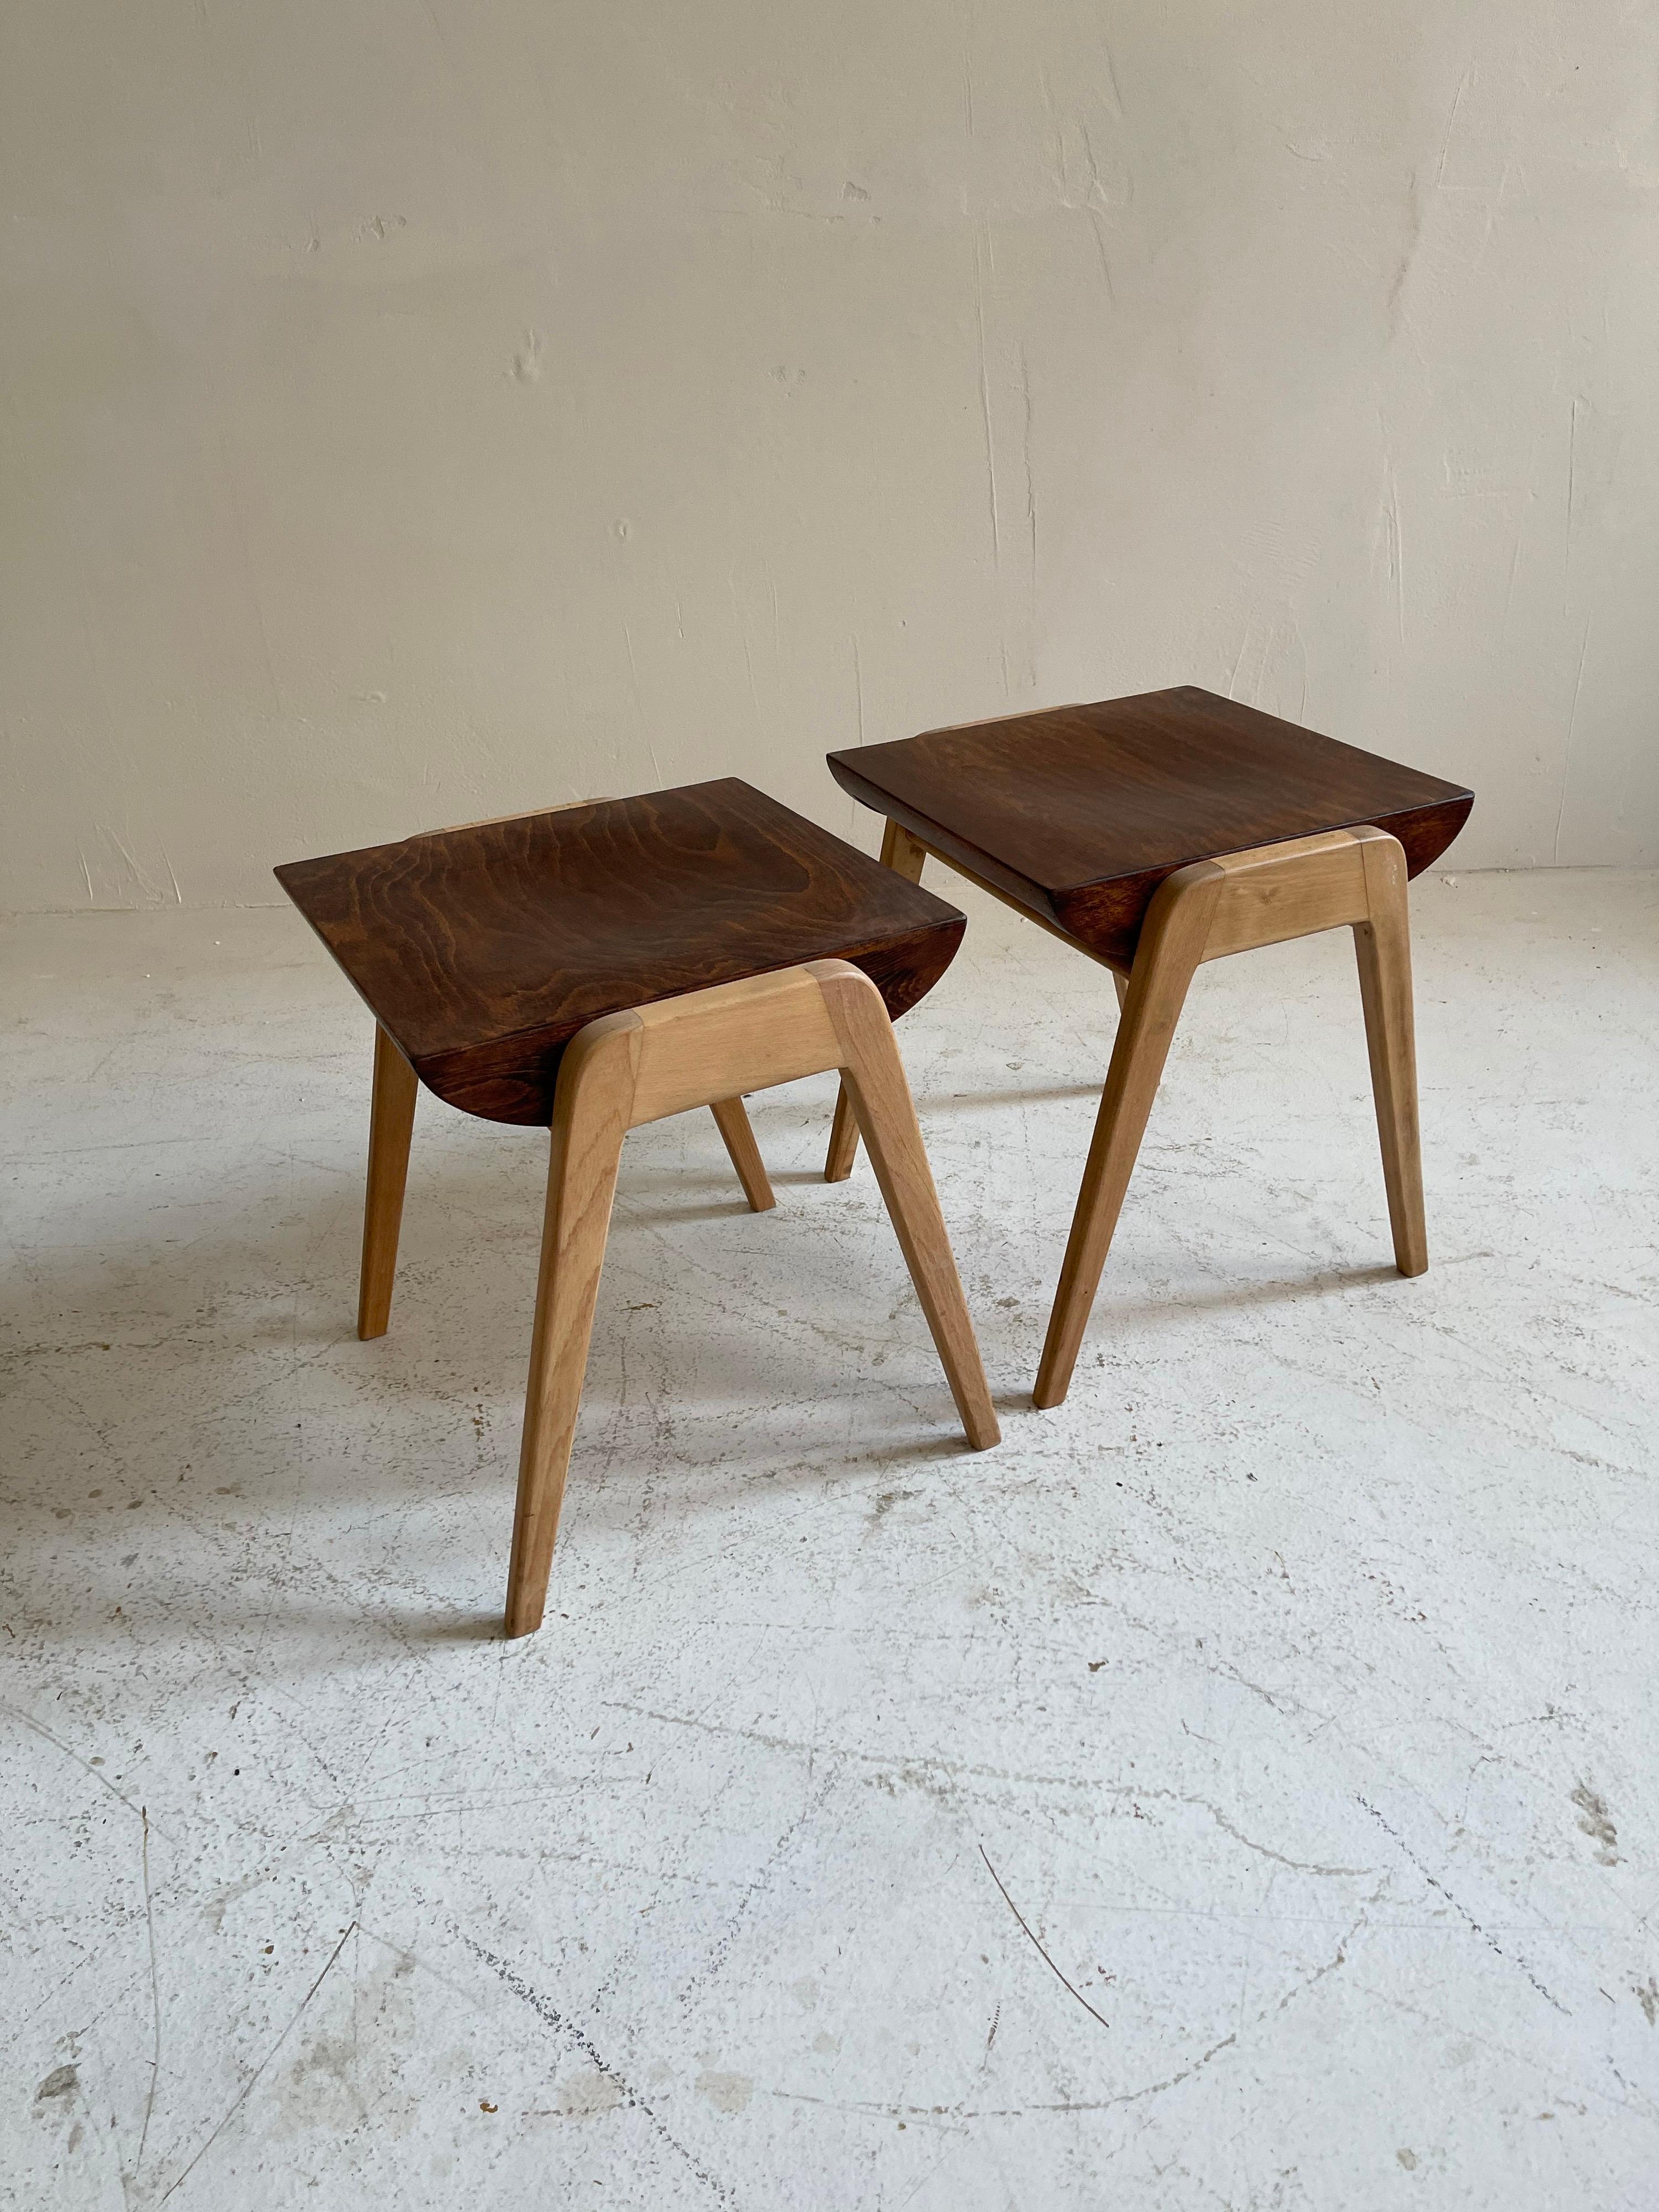 Franz Schuster Model 'Maestro' Dining Room Chairs & Stools, Austria, 1950s For Sale 8